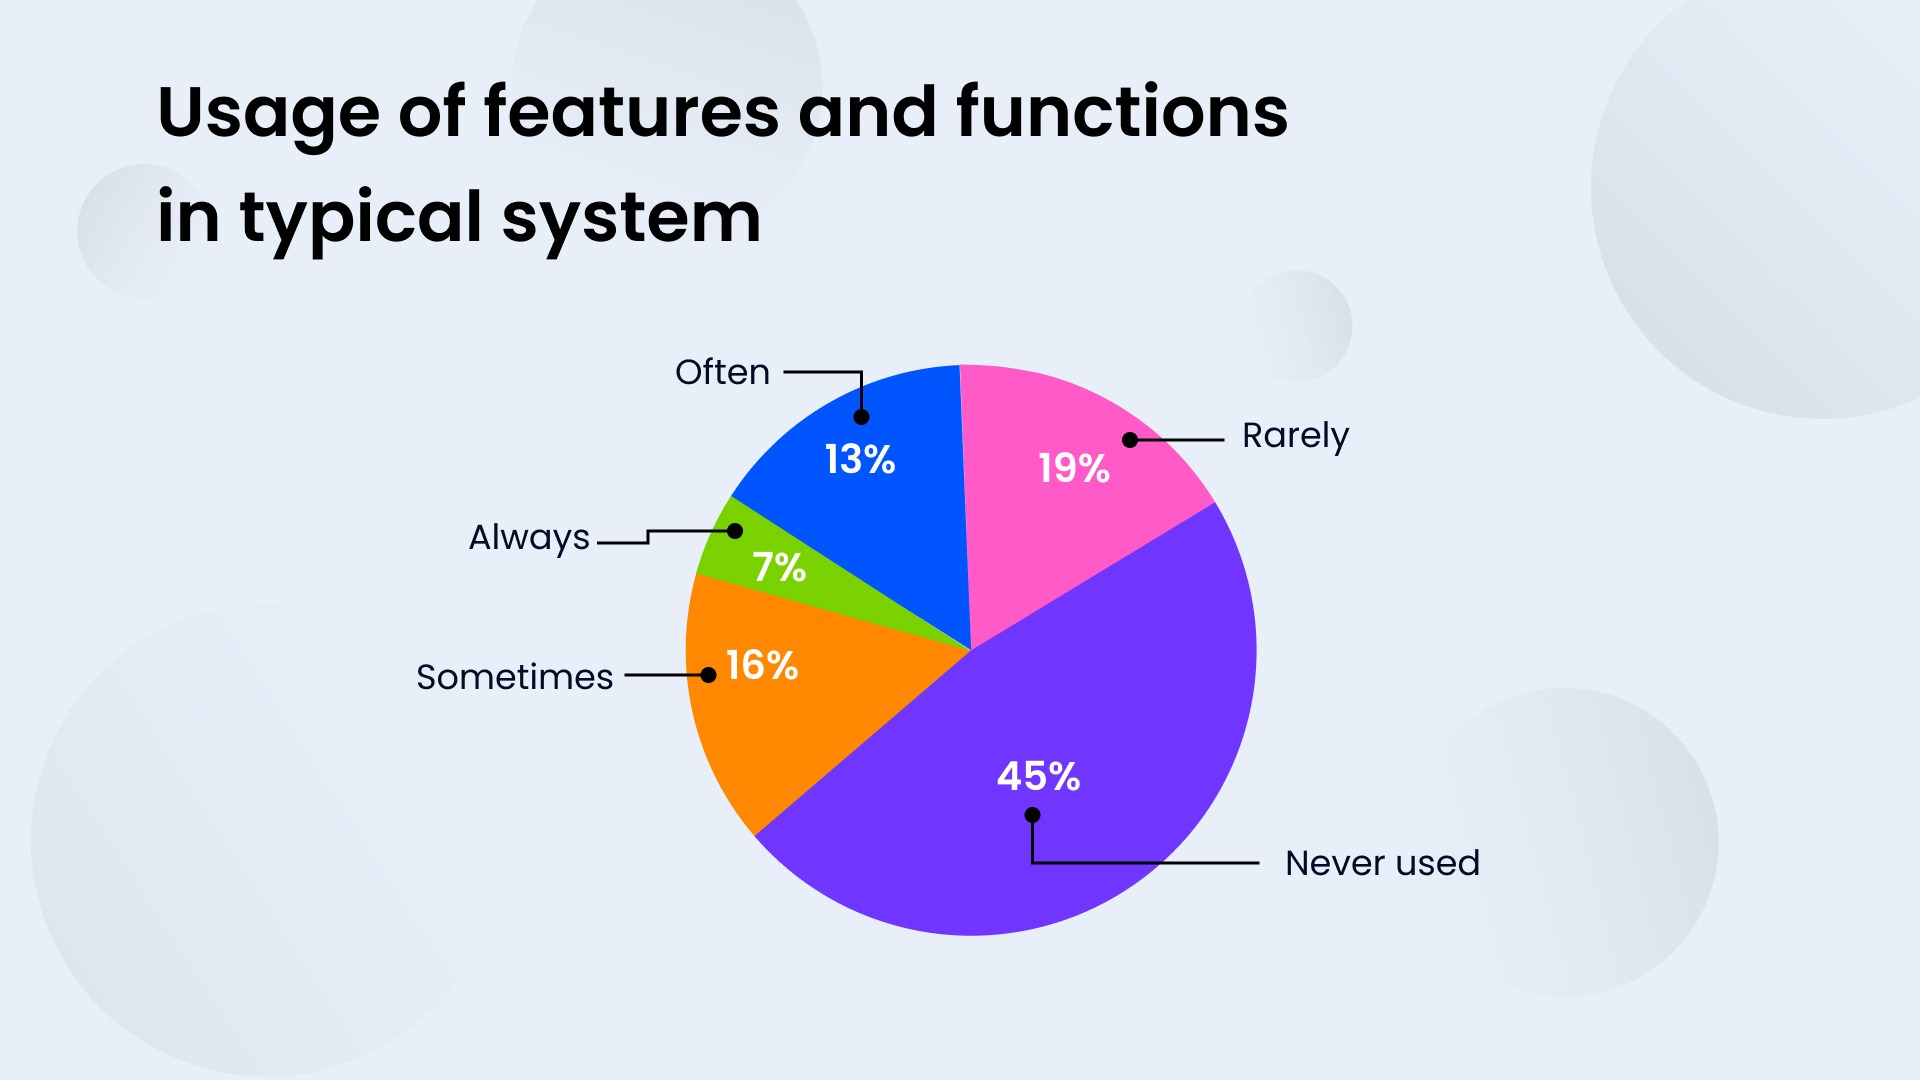 Usage of features and functions in typical system